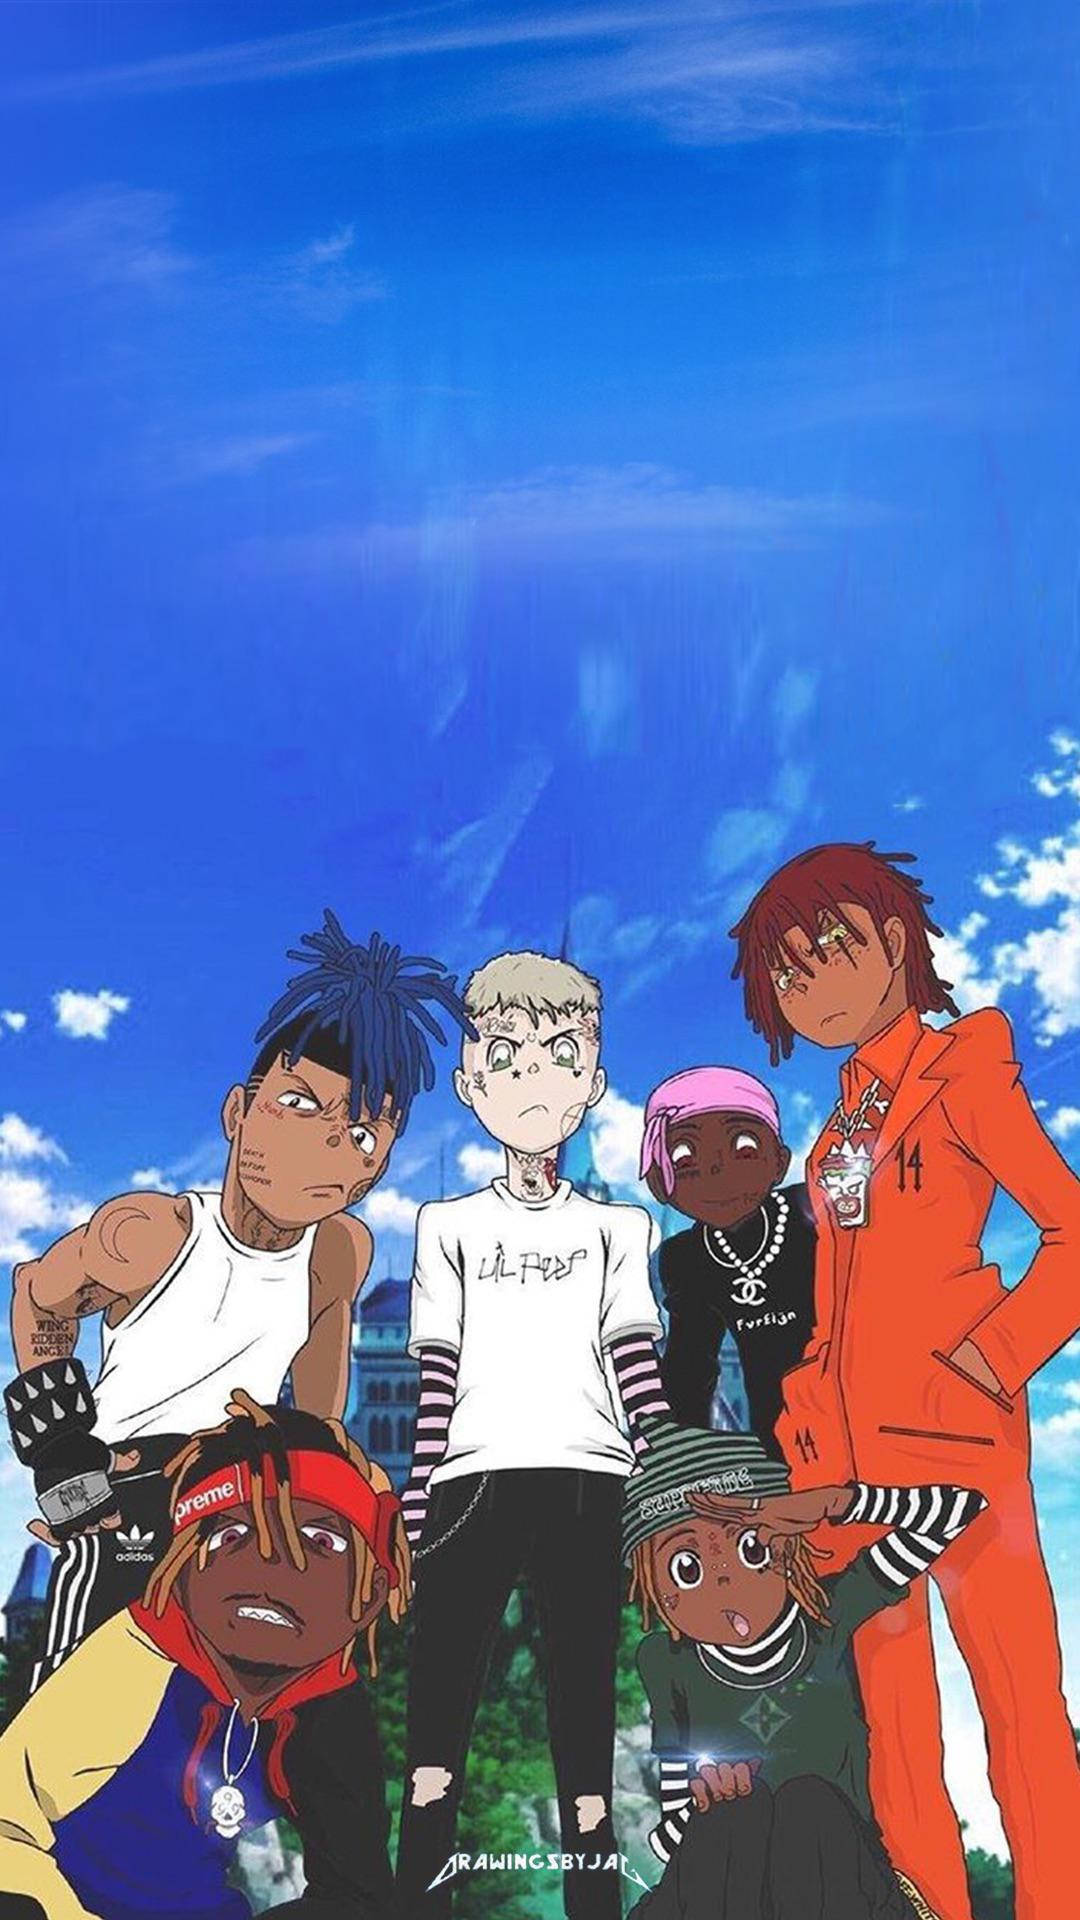 Animated Juice Wrld With Friends Background